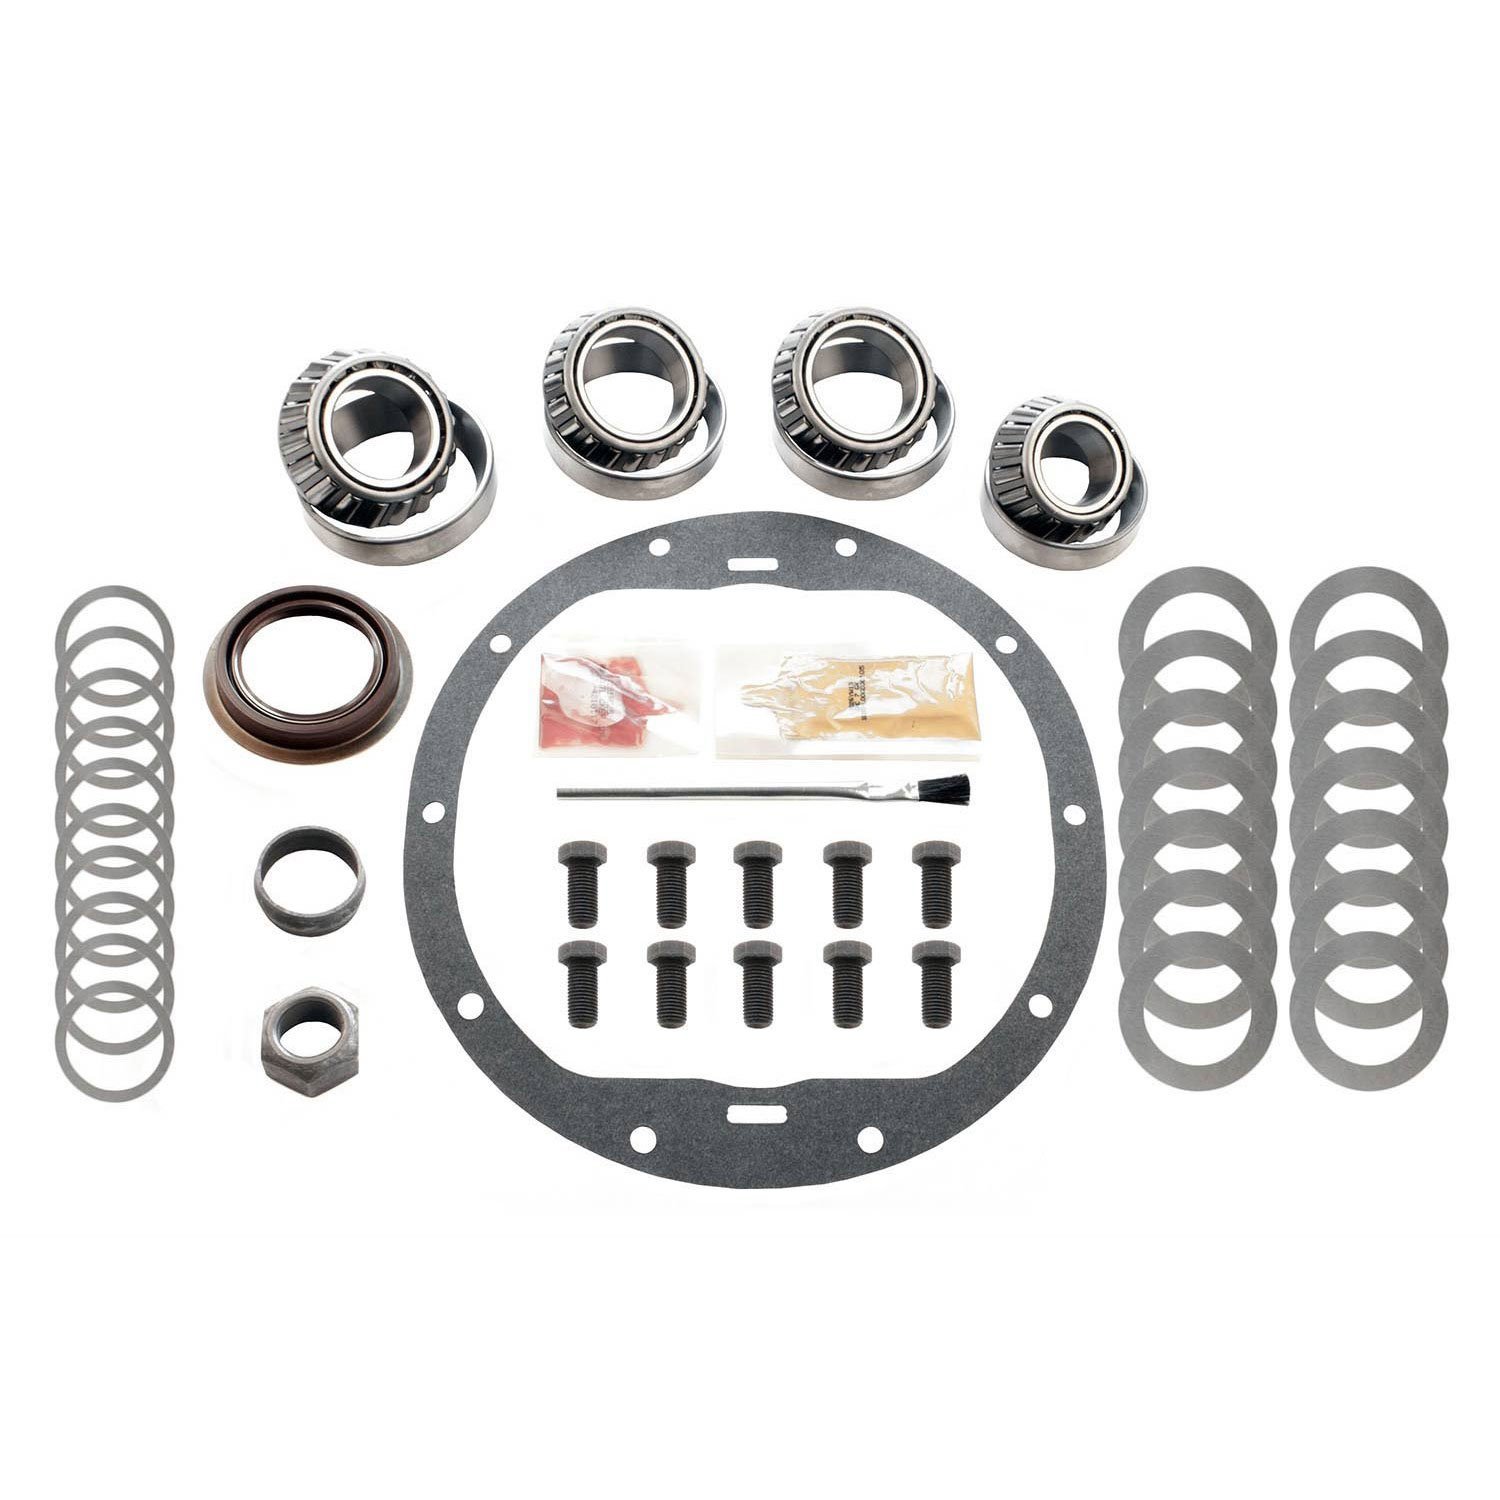 Differential Complete Kit GM Truck 8.6"